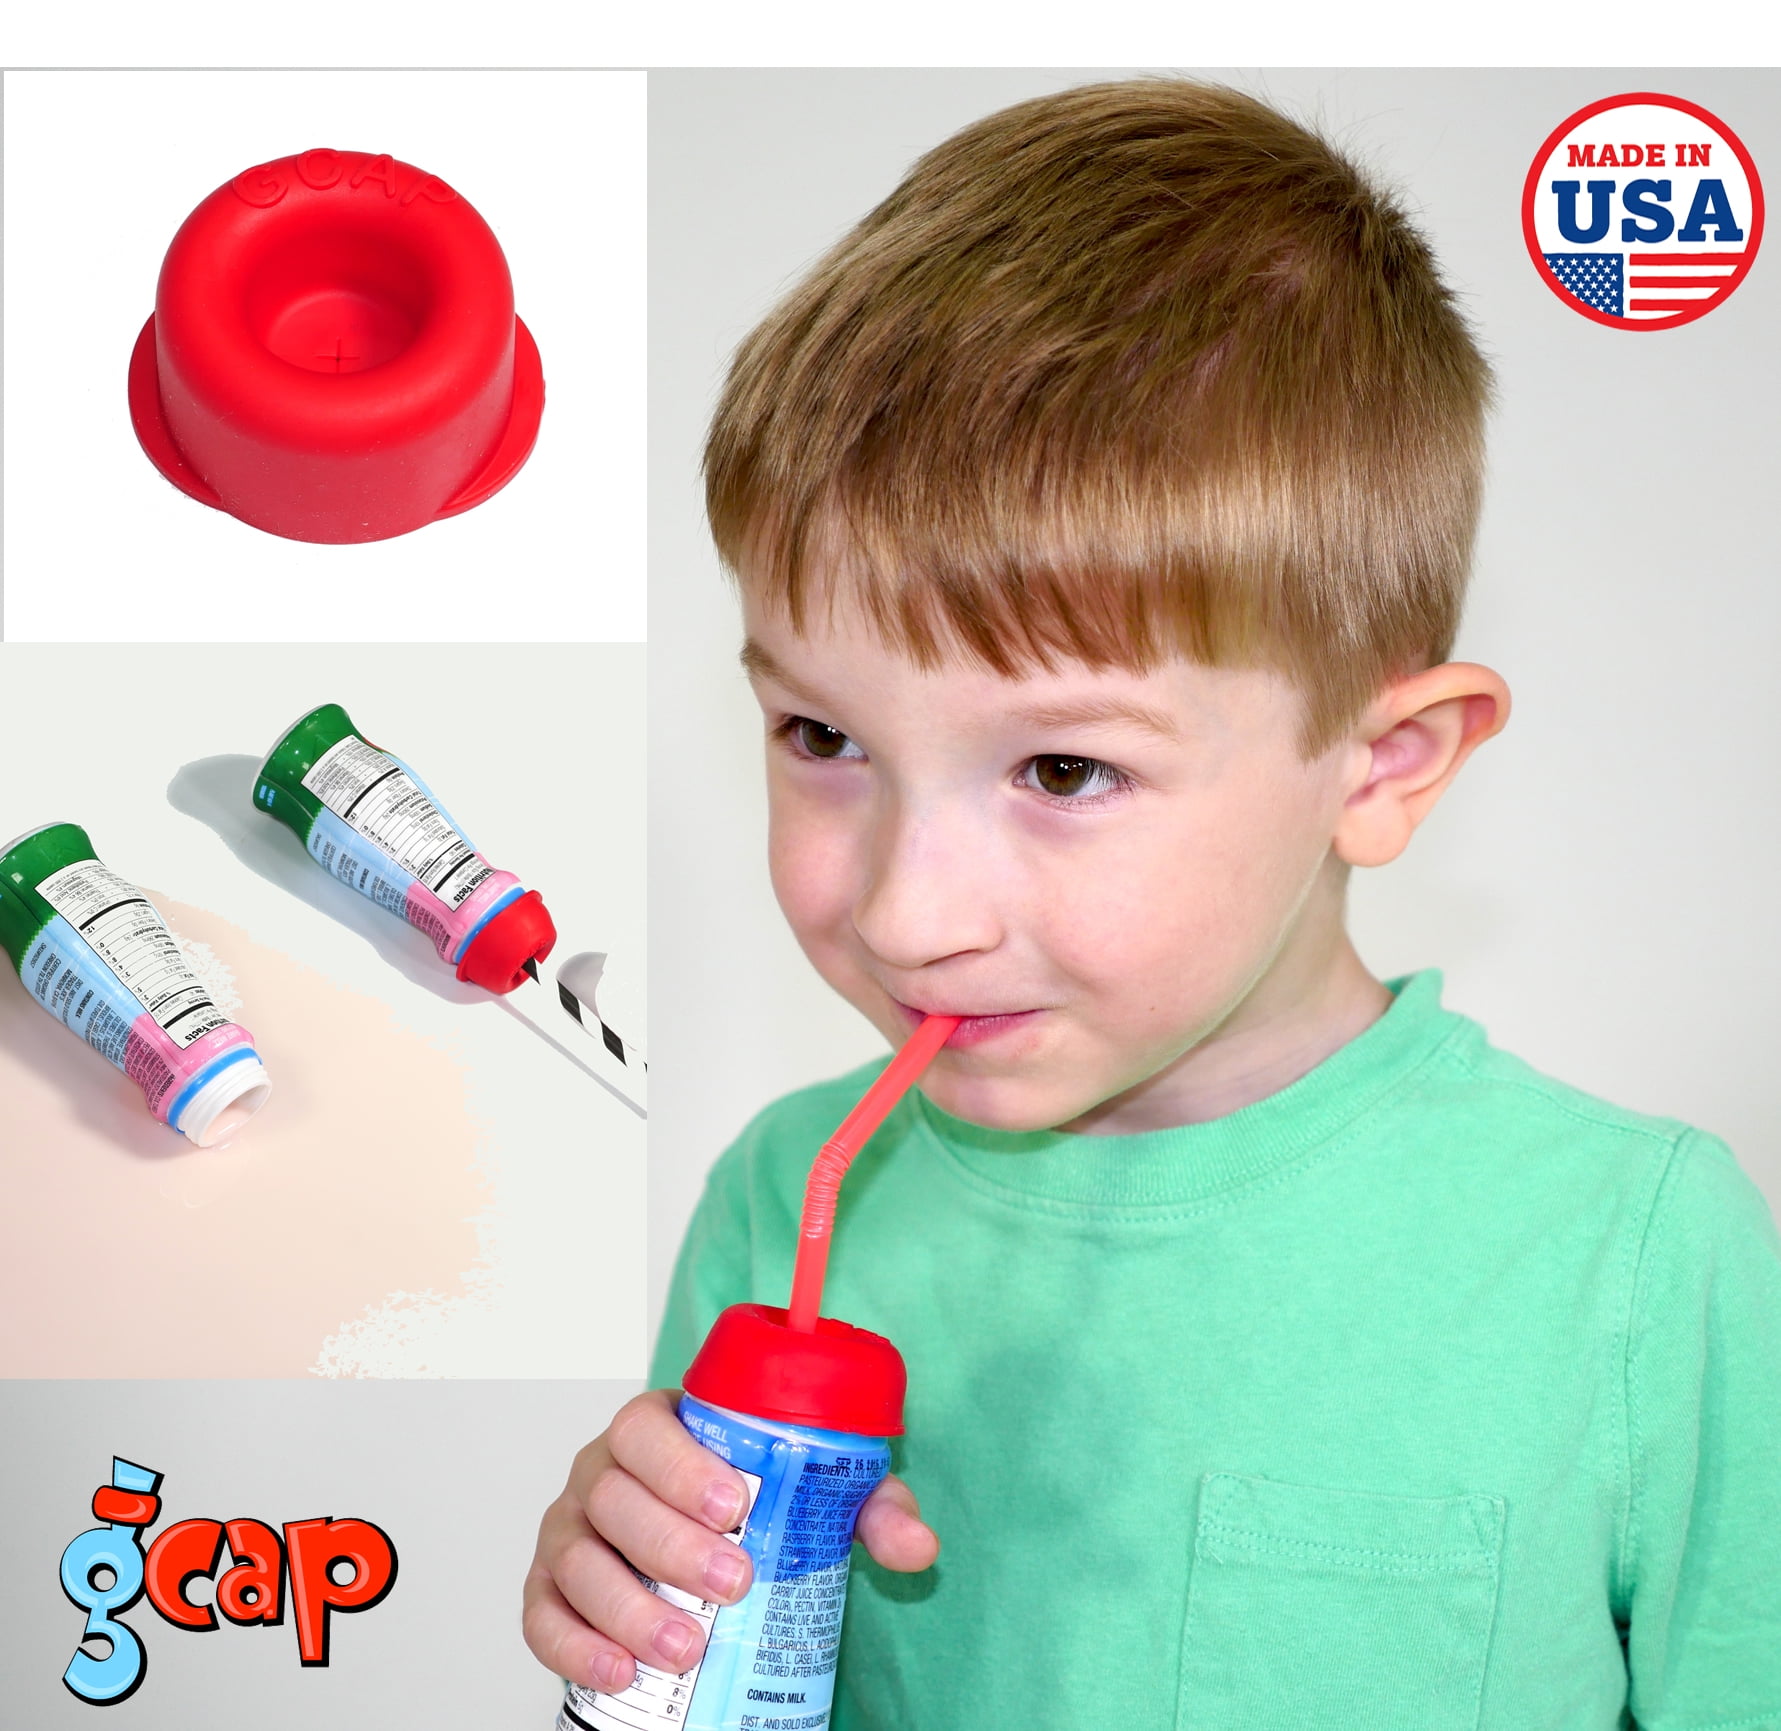 Clever cap transforms adult drink bottles into spill-proof kid's cups